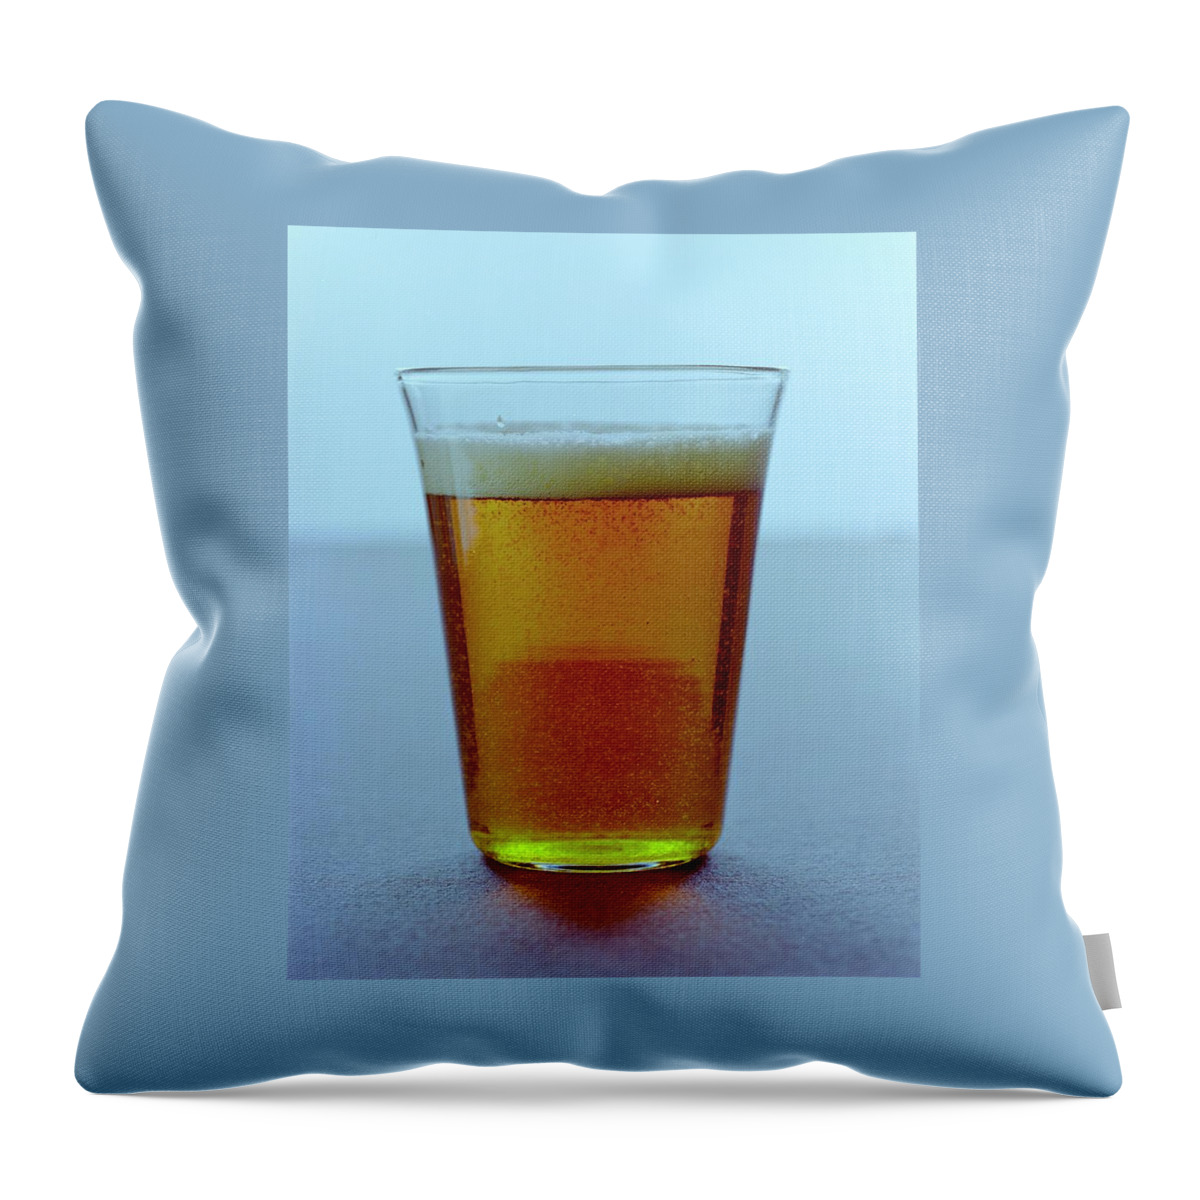 A Glass Of Beer #6 Throw Pillow